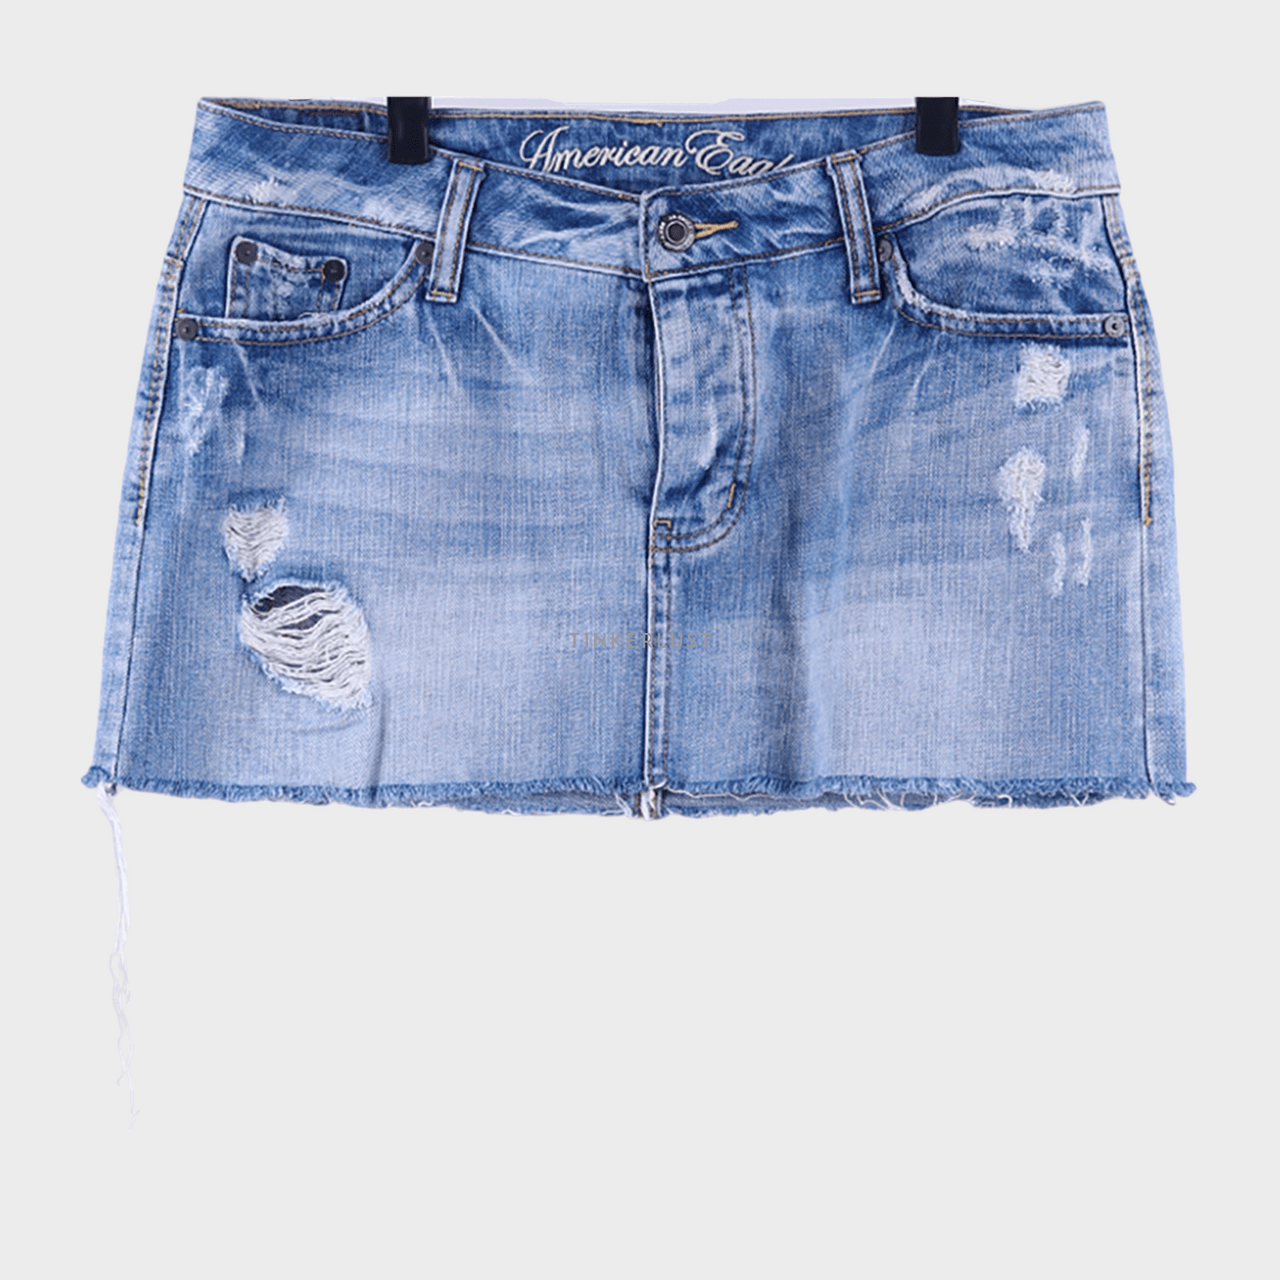 American Eagle Blue Jeans Unfinished Mini Skirt